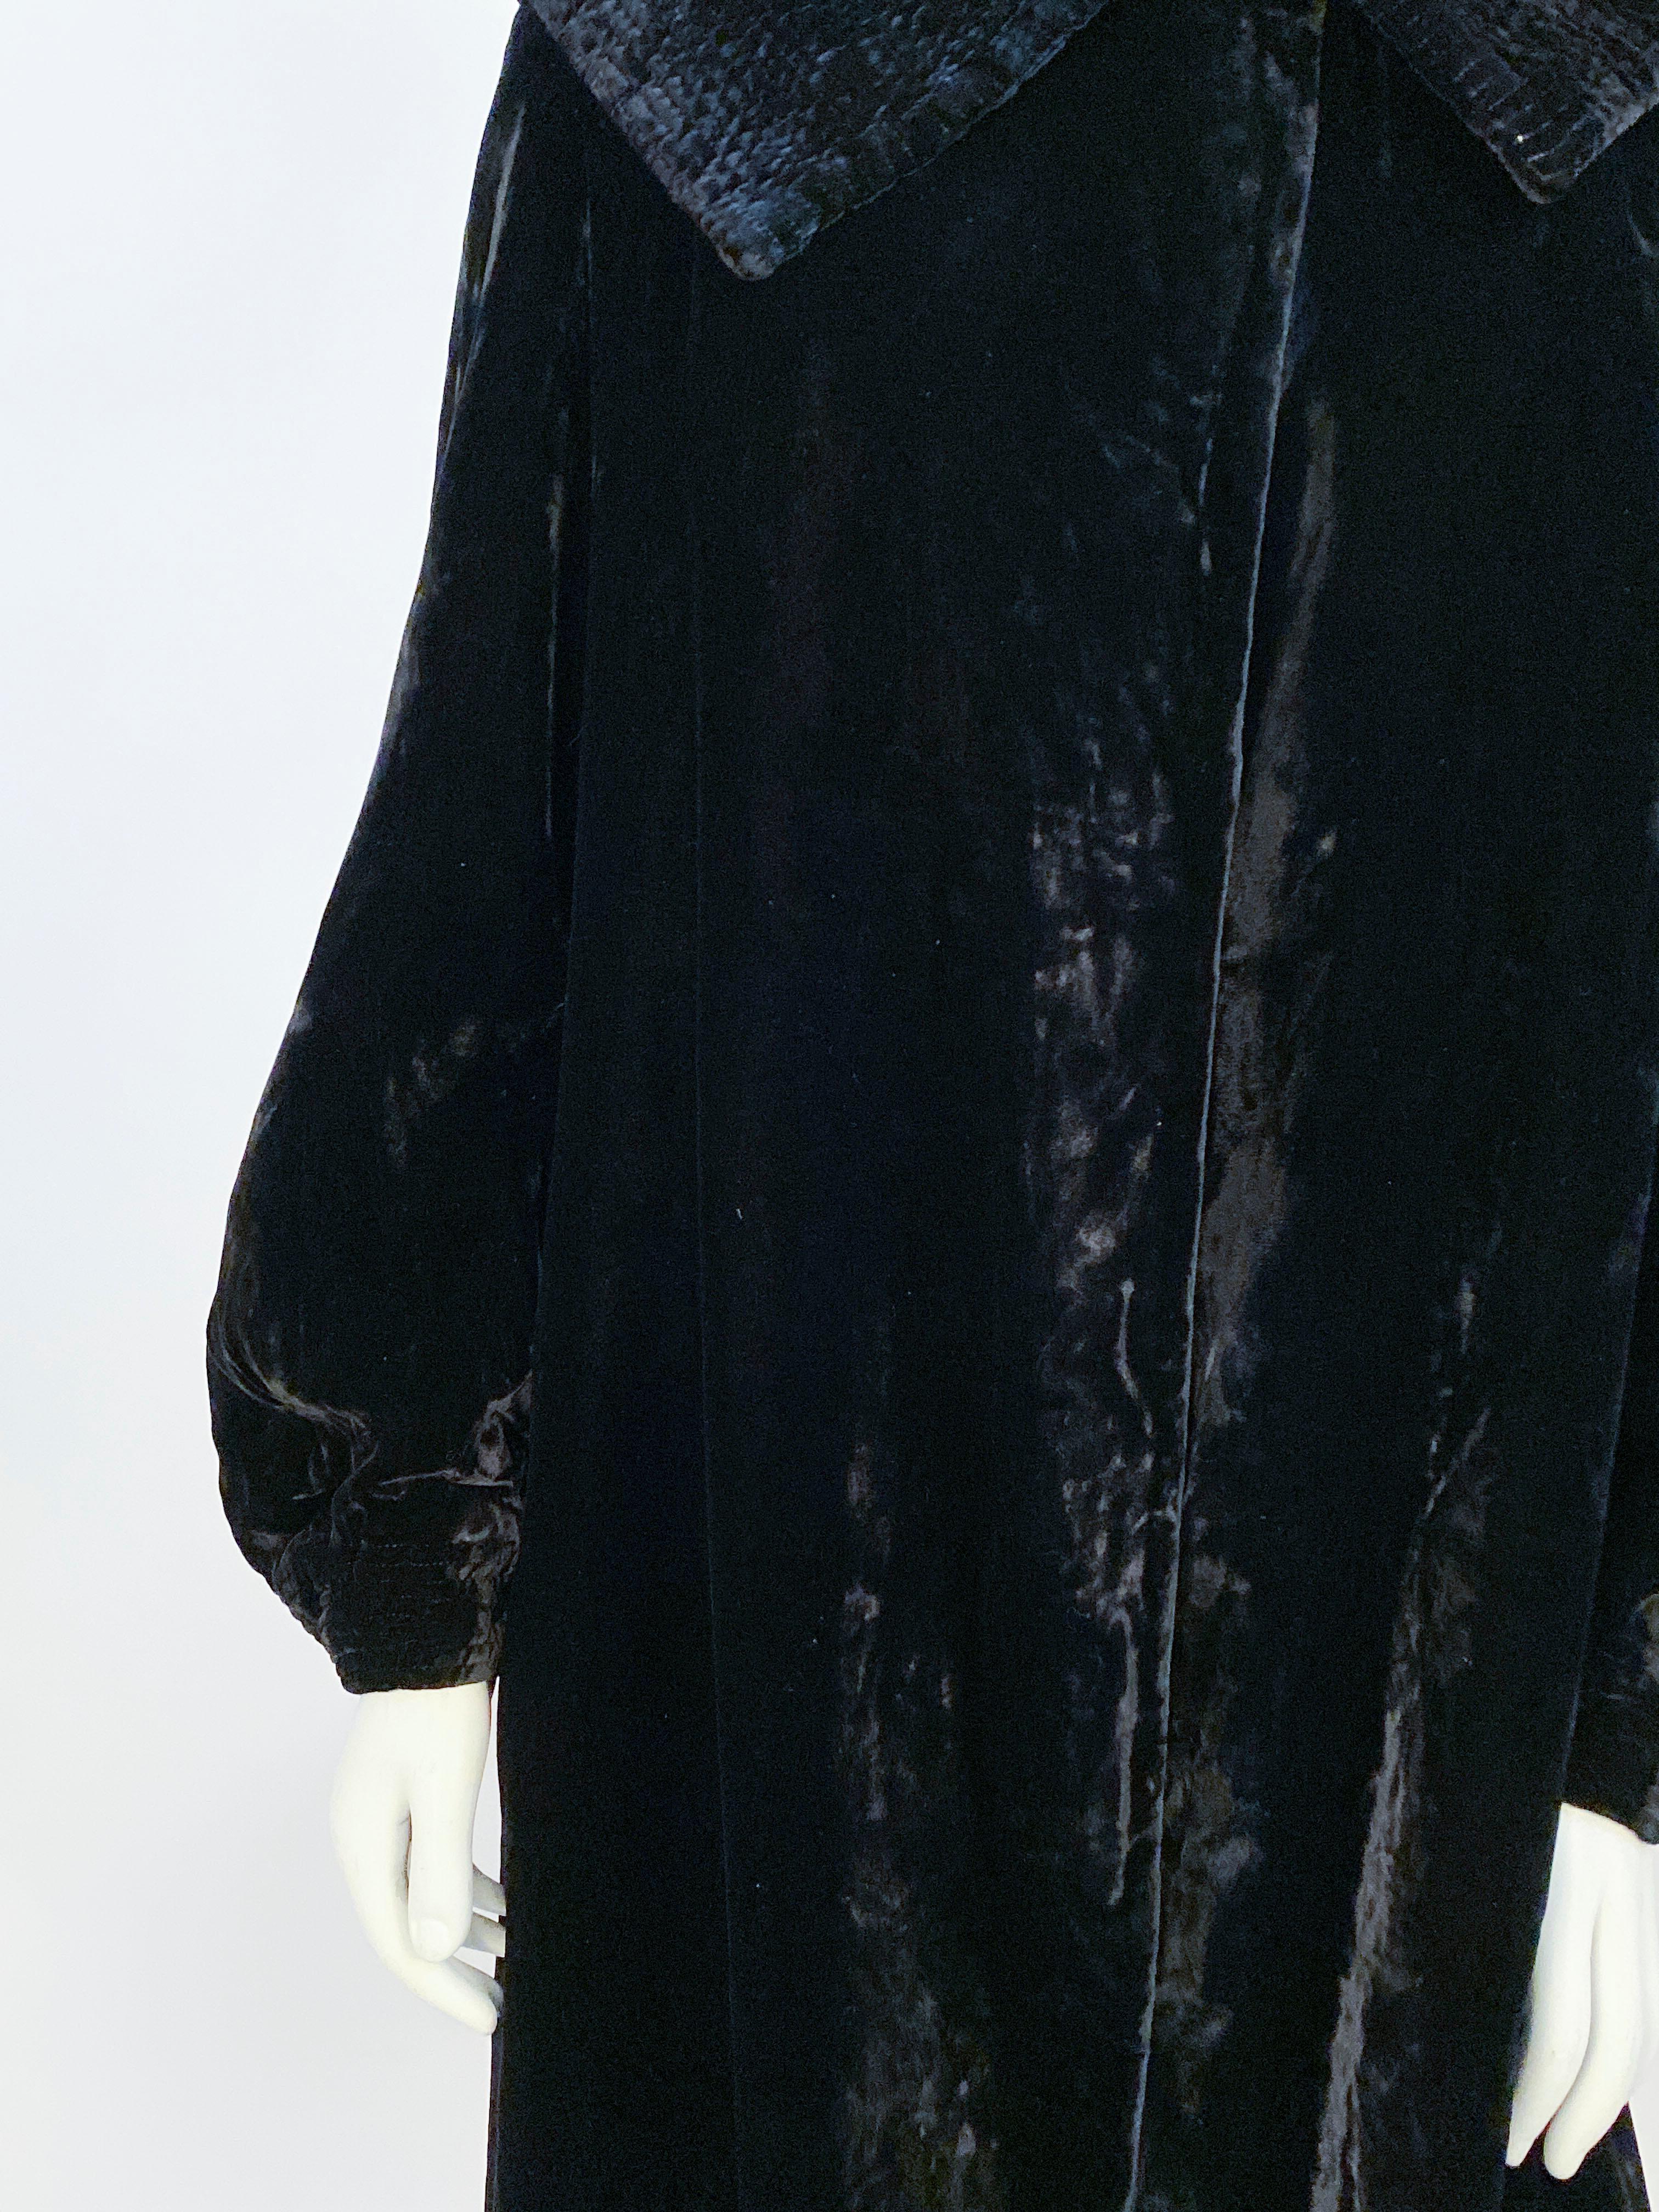 1930s Black silk velvet coat with full bell sleeves, ruched cuffs, oversized collar, and an off-white lining. 